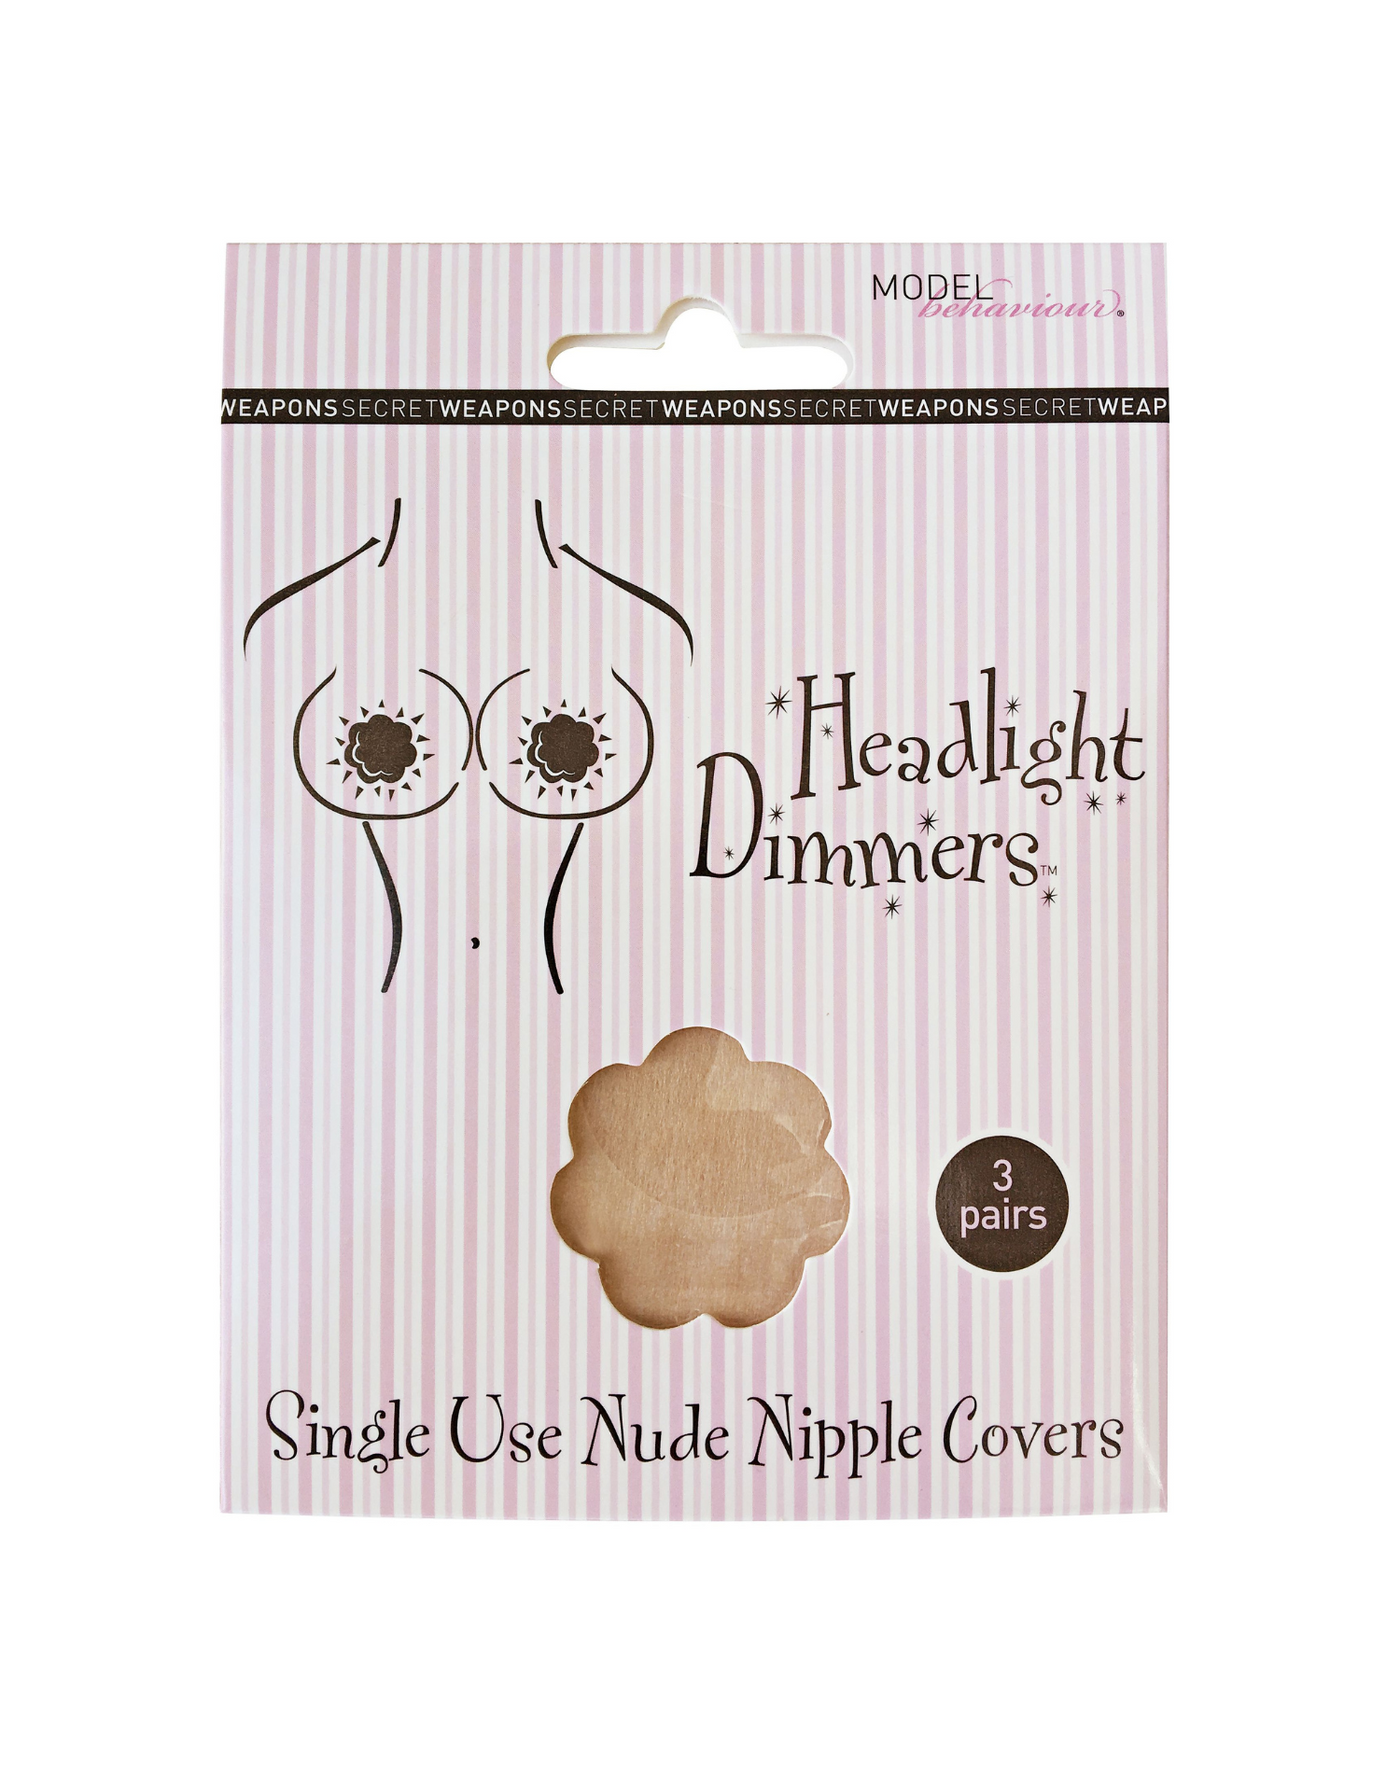 SECRET WEAPONS Disposable Nipple Covers (3 Pair Pack)